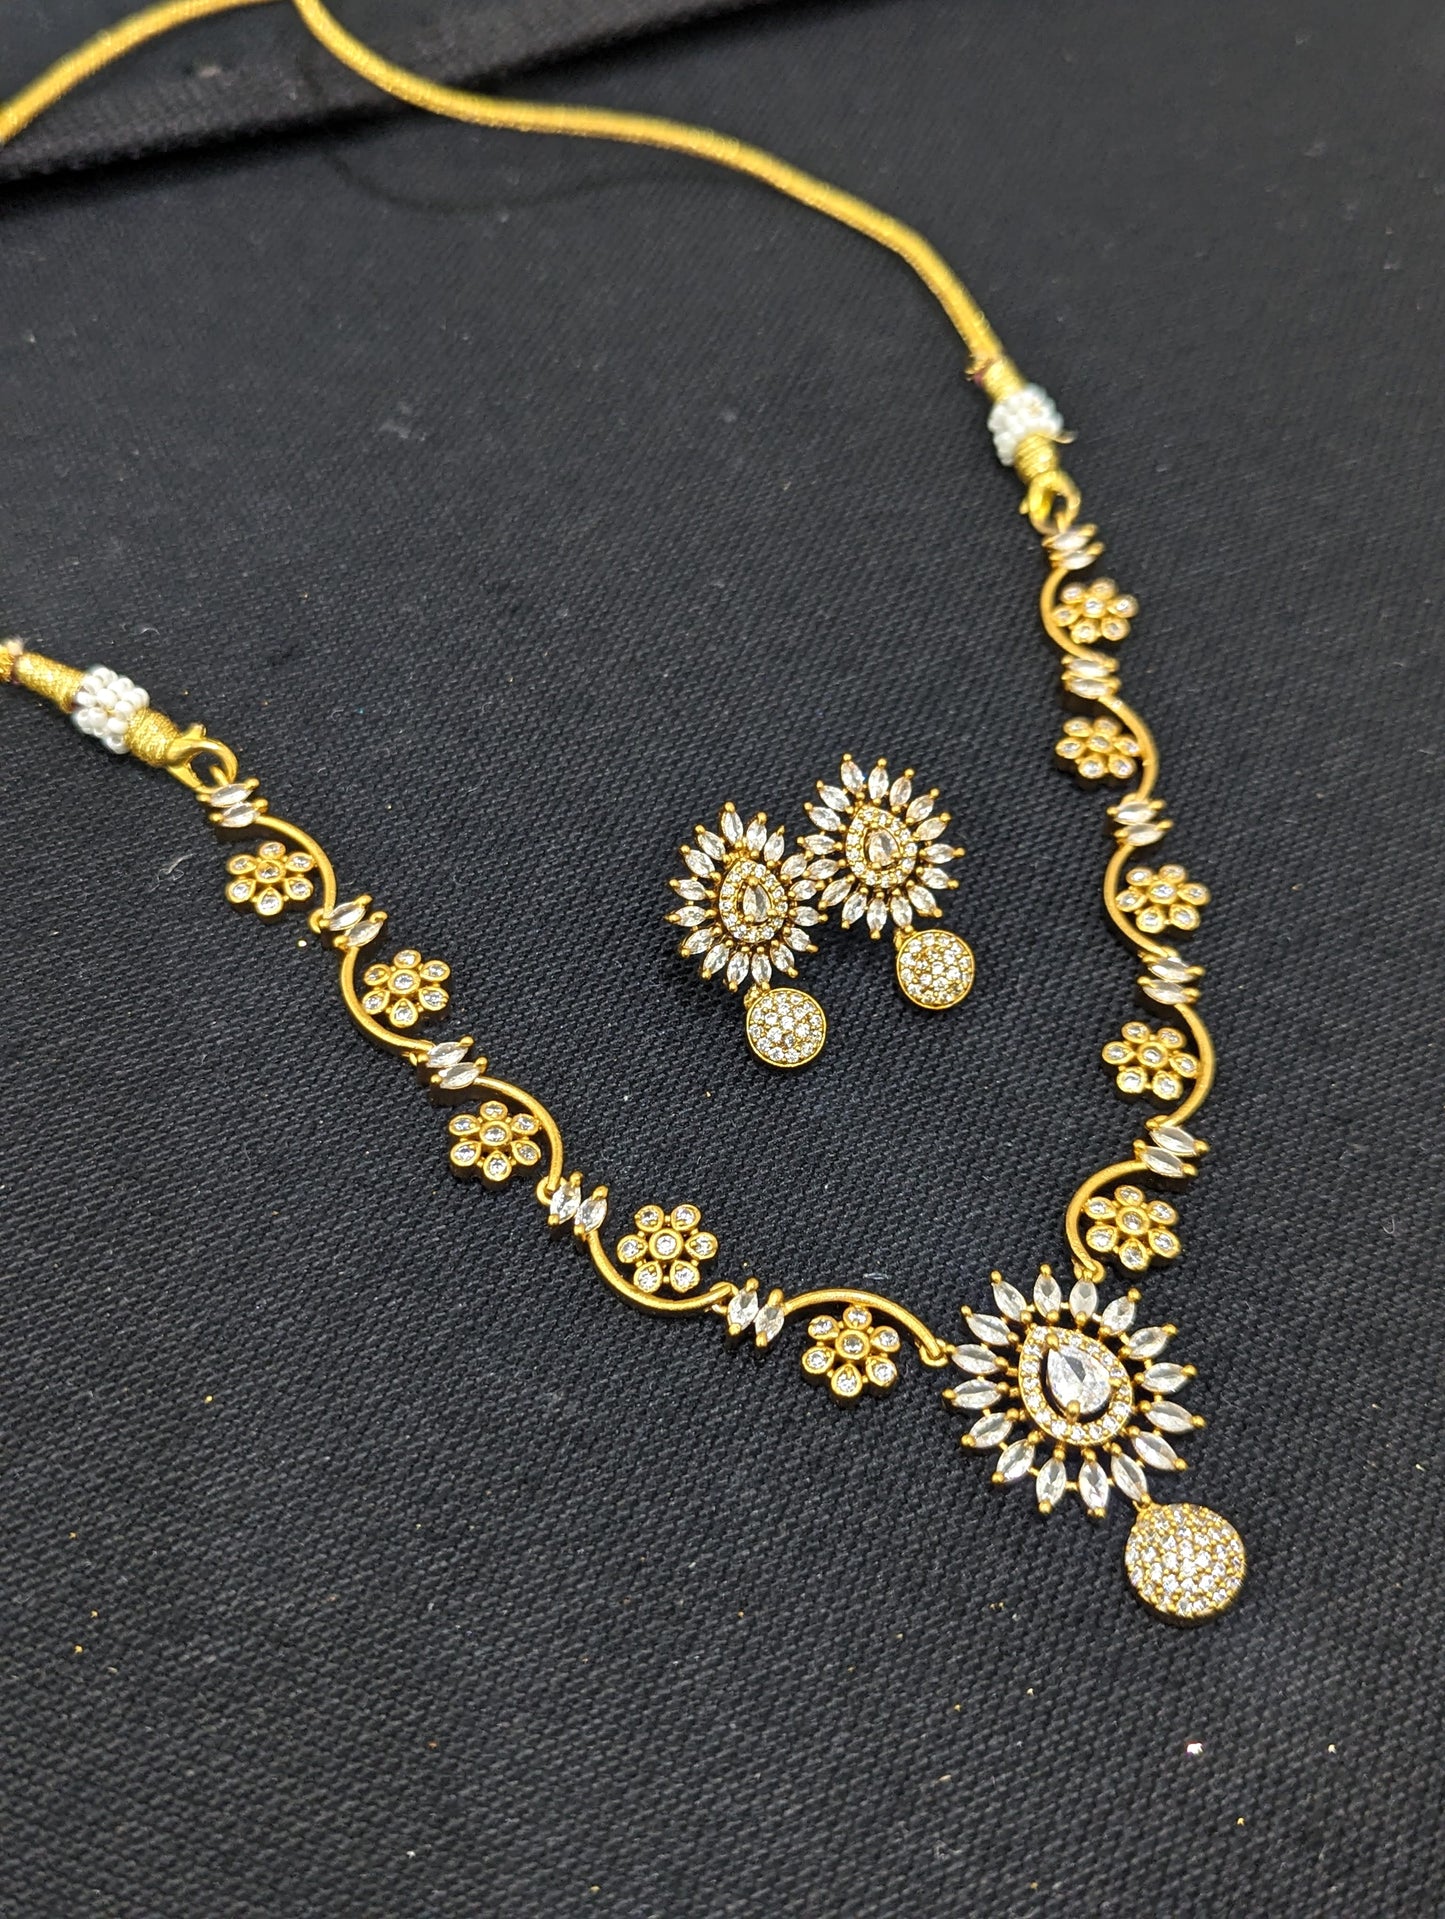 Antique Flower CZ Necklace and Earrings set